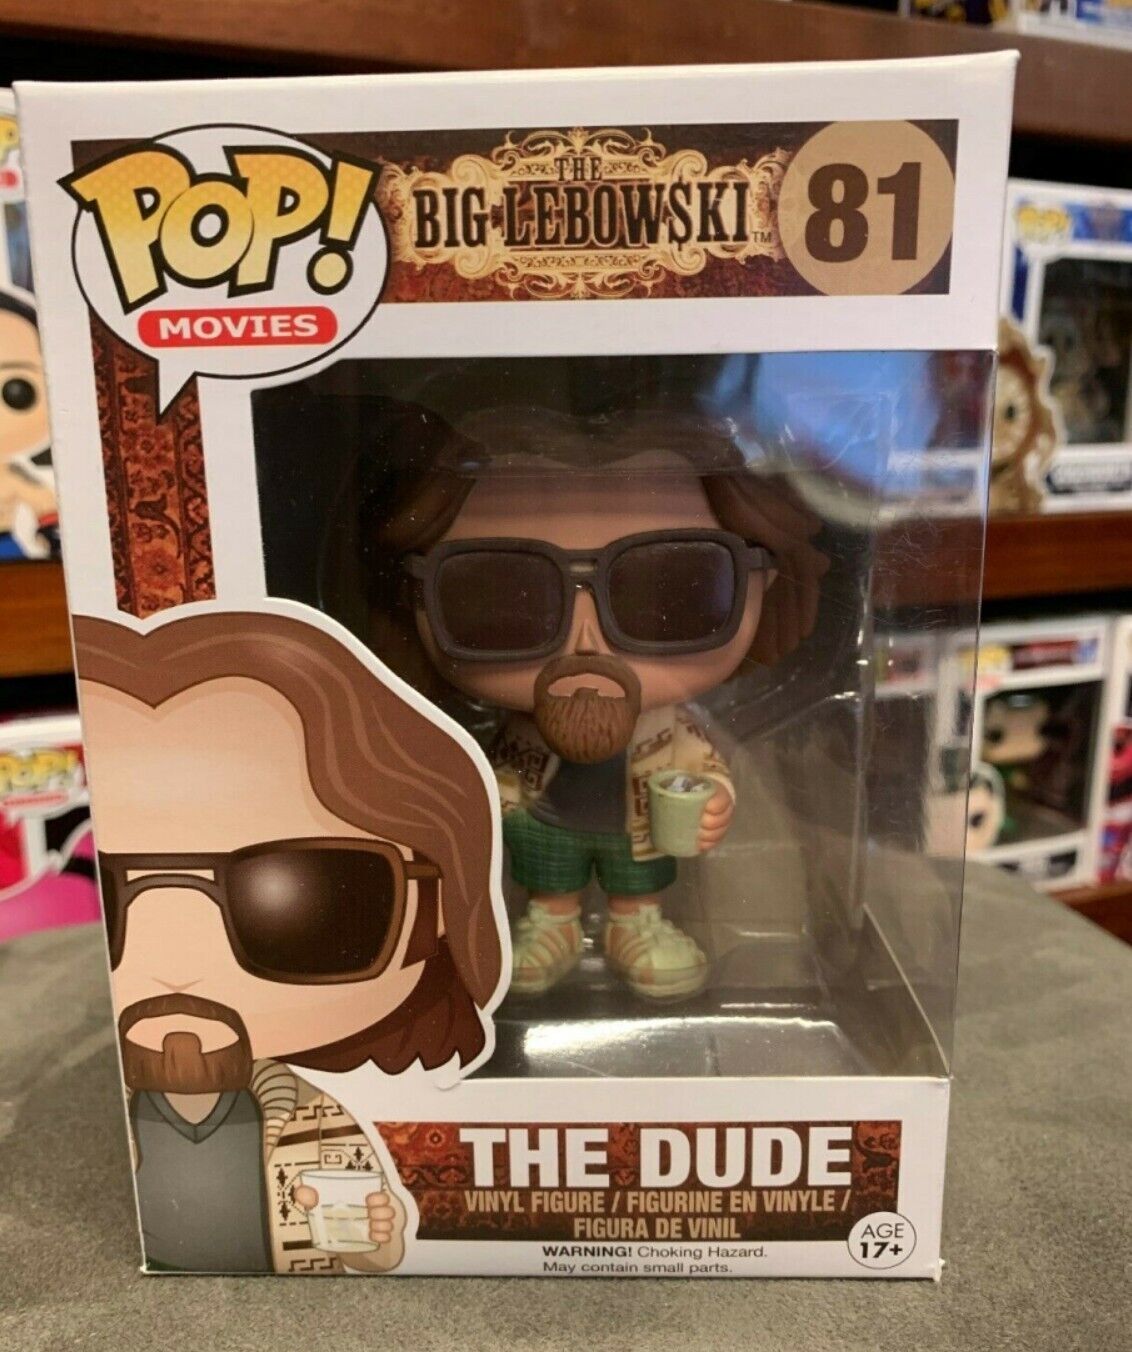 Movies: The Big Lebowski 81# The Dude Vinyl Models Toys Action Figures